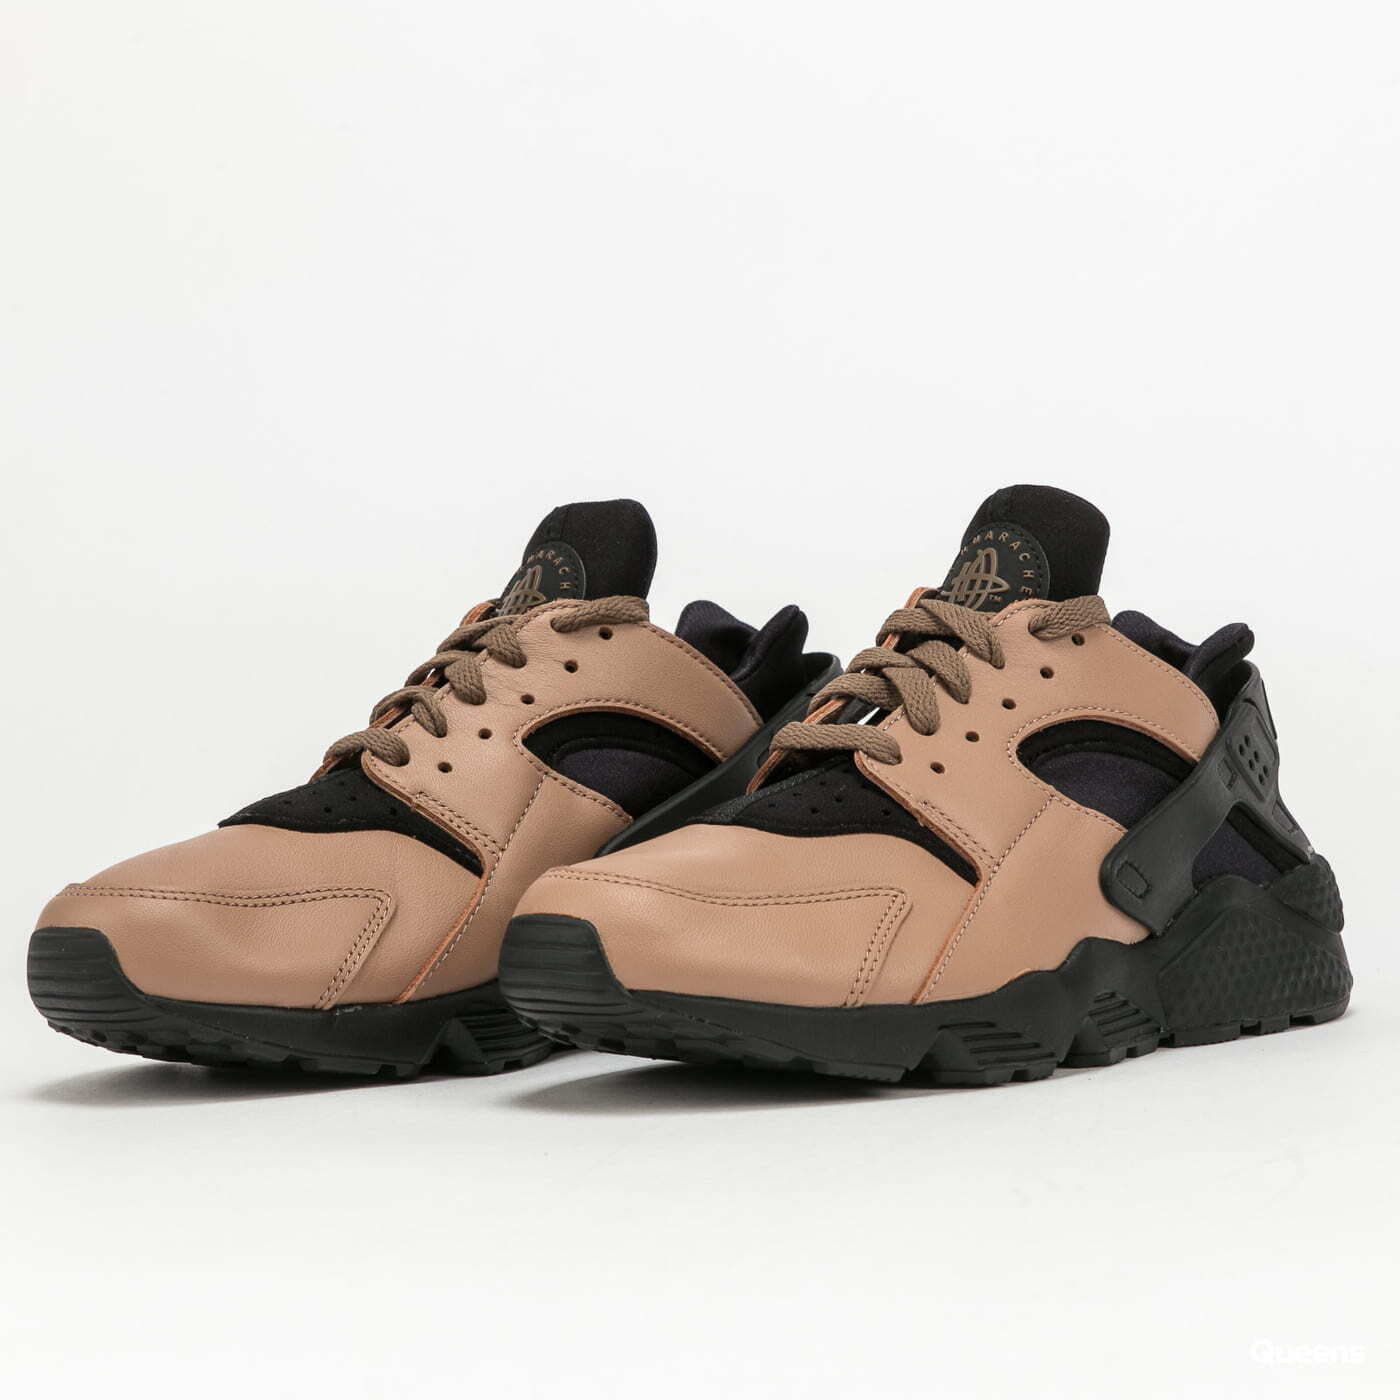 Men's sneakers and shoes Nike Air Huarache LE Toadstool/ Black/ Chestnut Brown